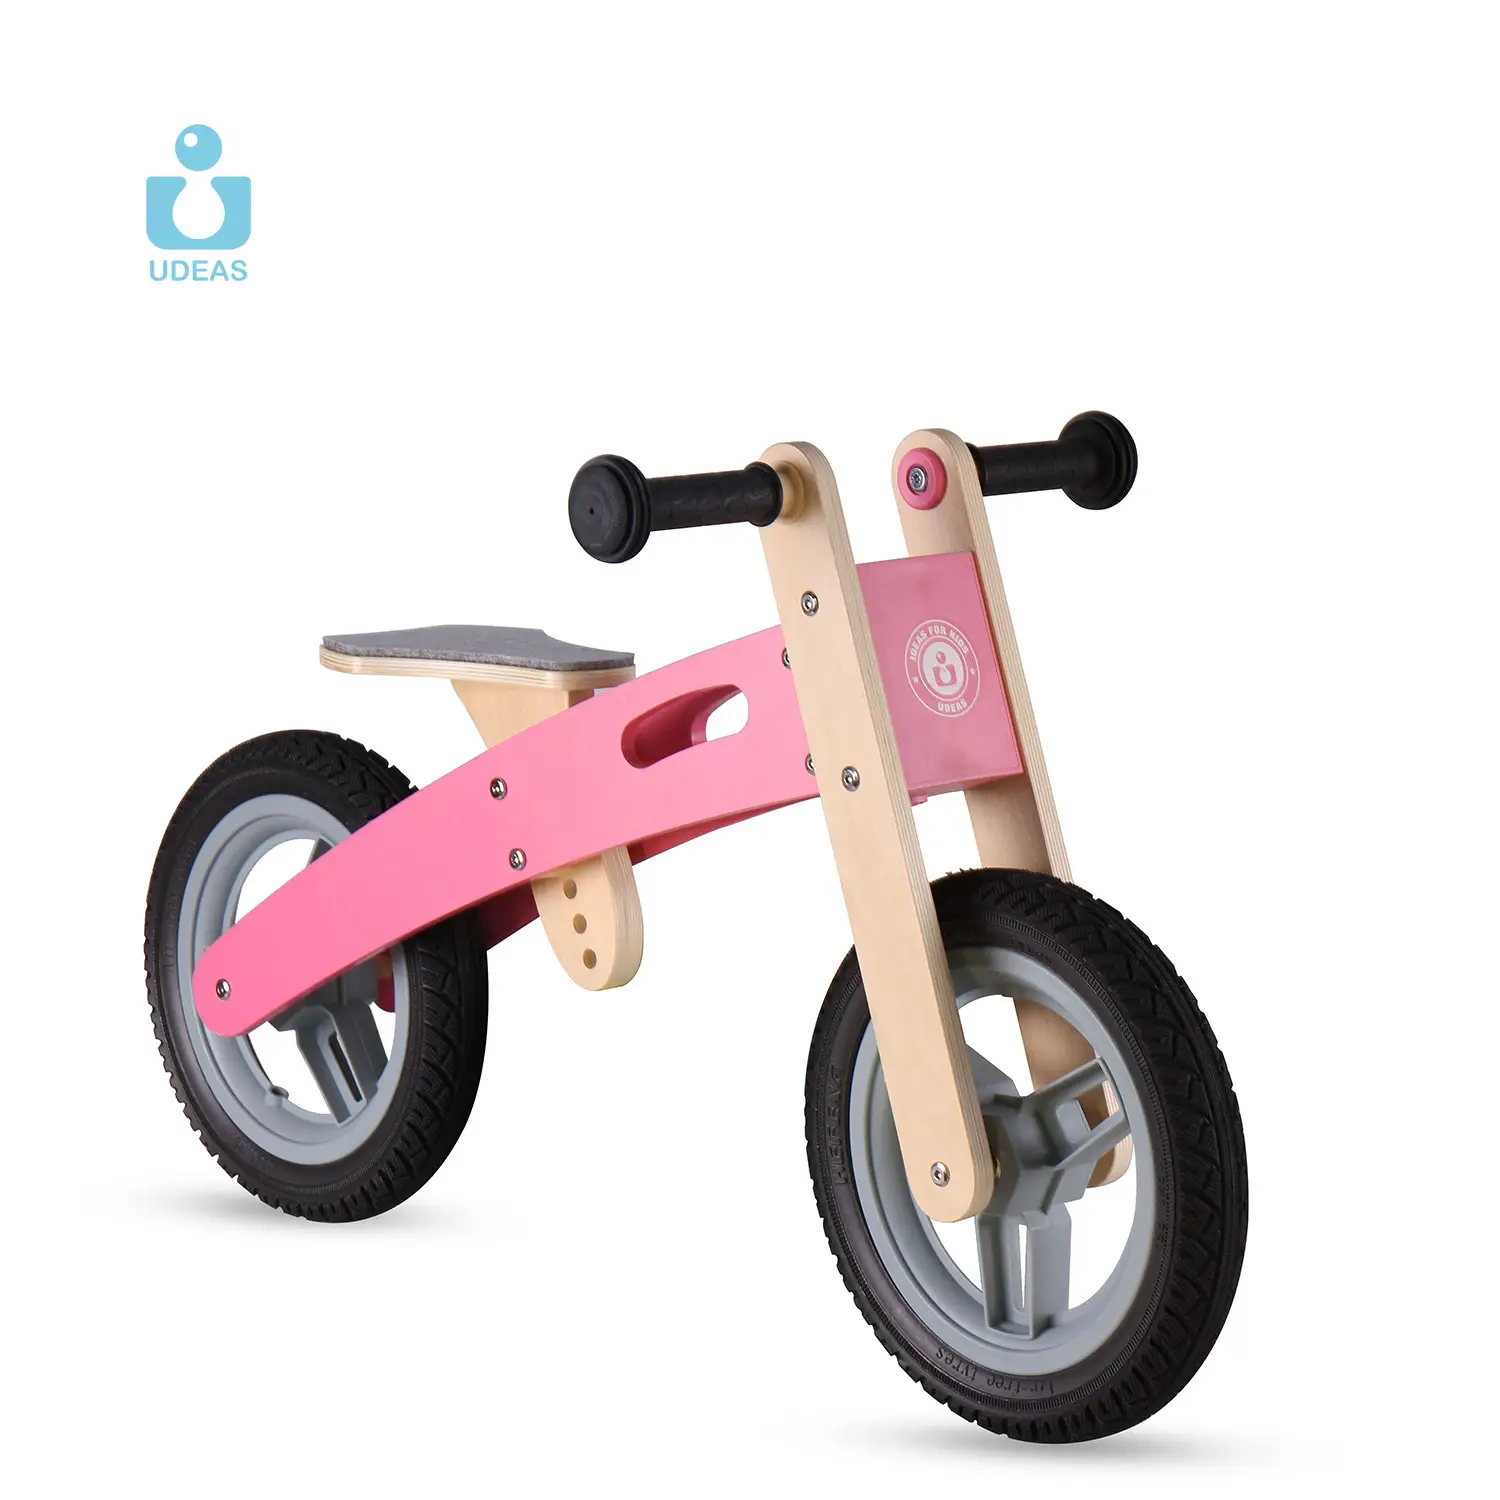 UDEAS Factory Price Baby Walker Kids Pink Balance Bike Toddler Wooden Bicycle No Pedal with EVA Tire